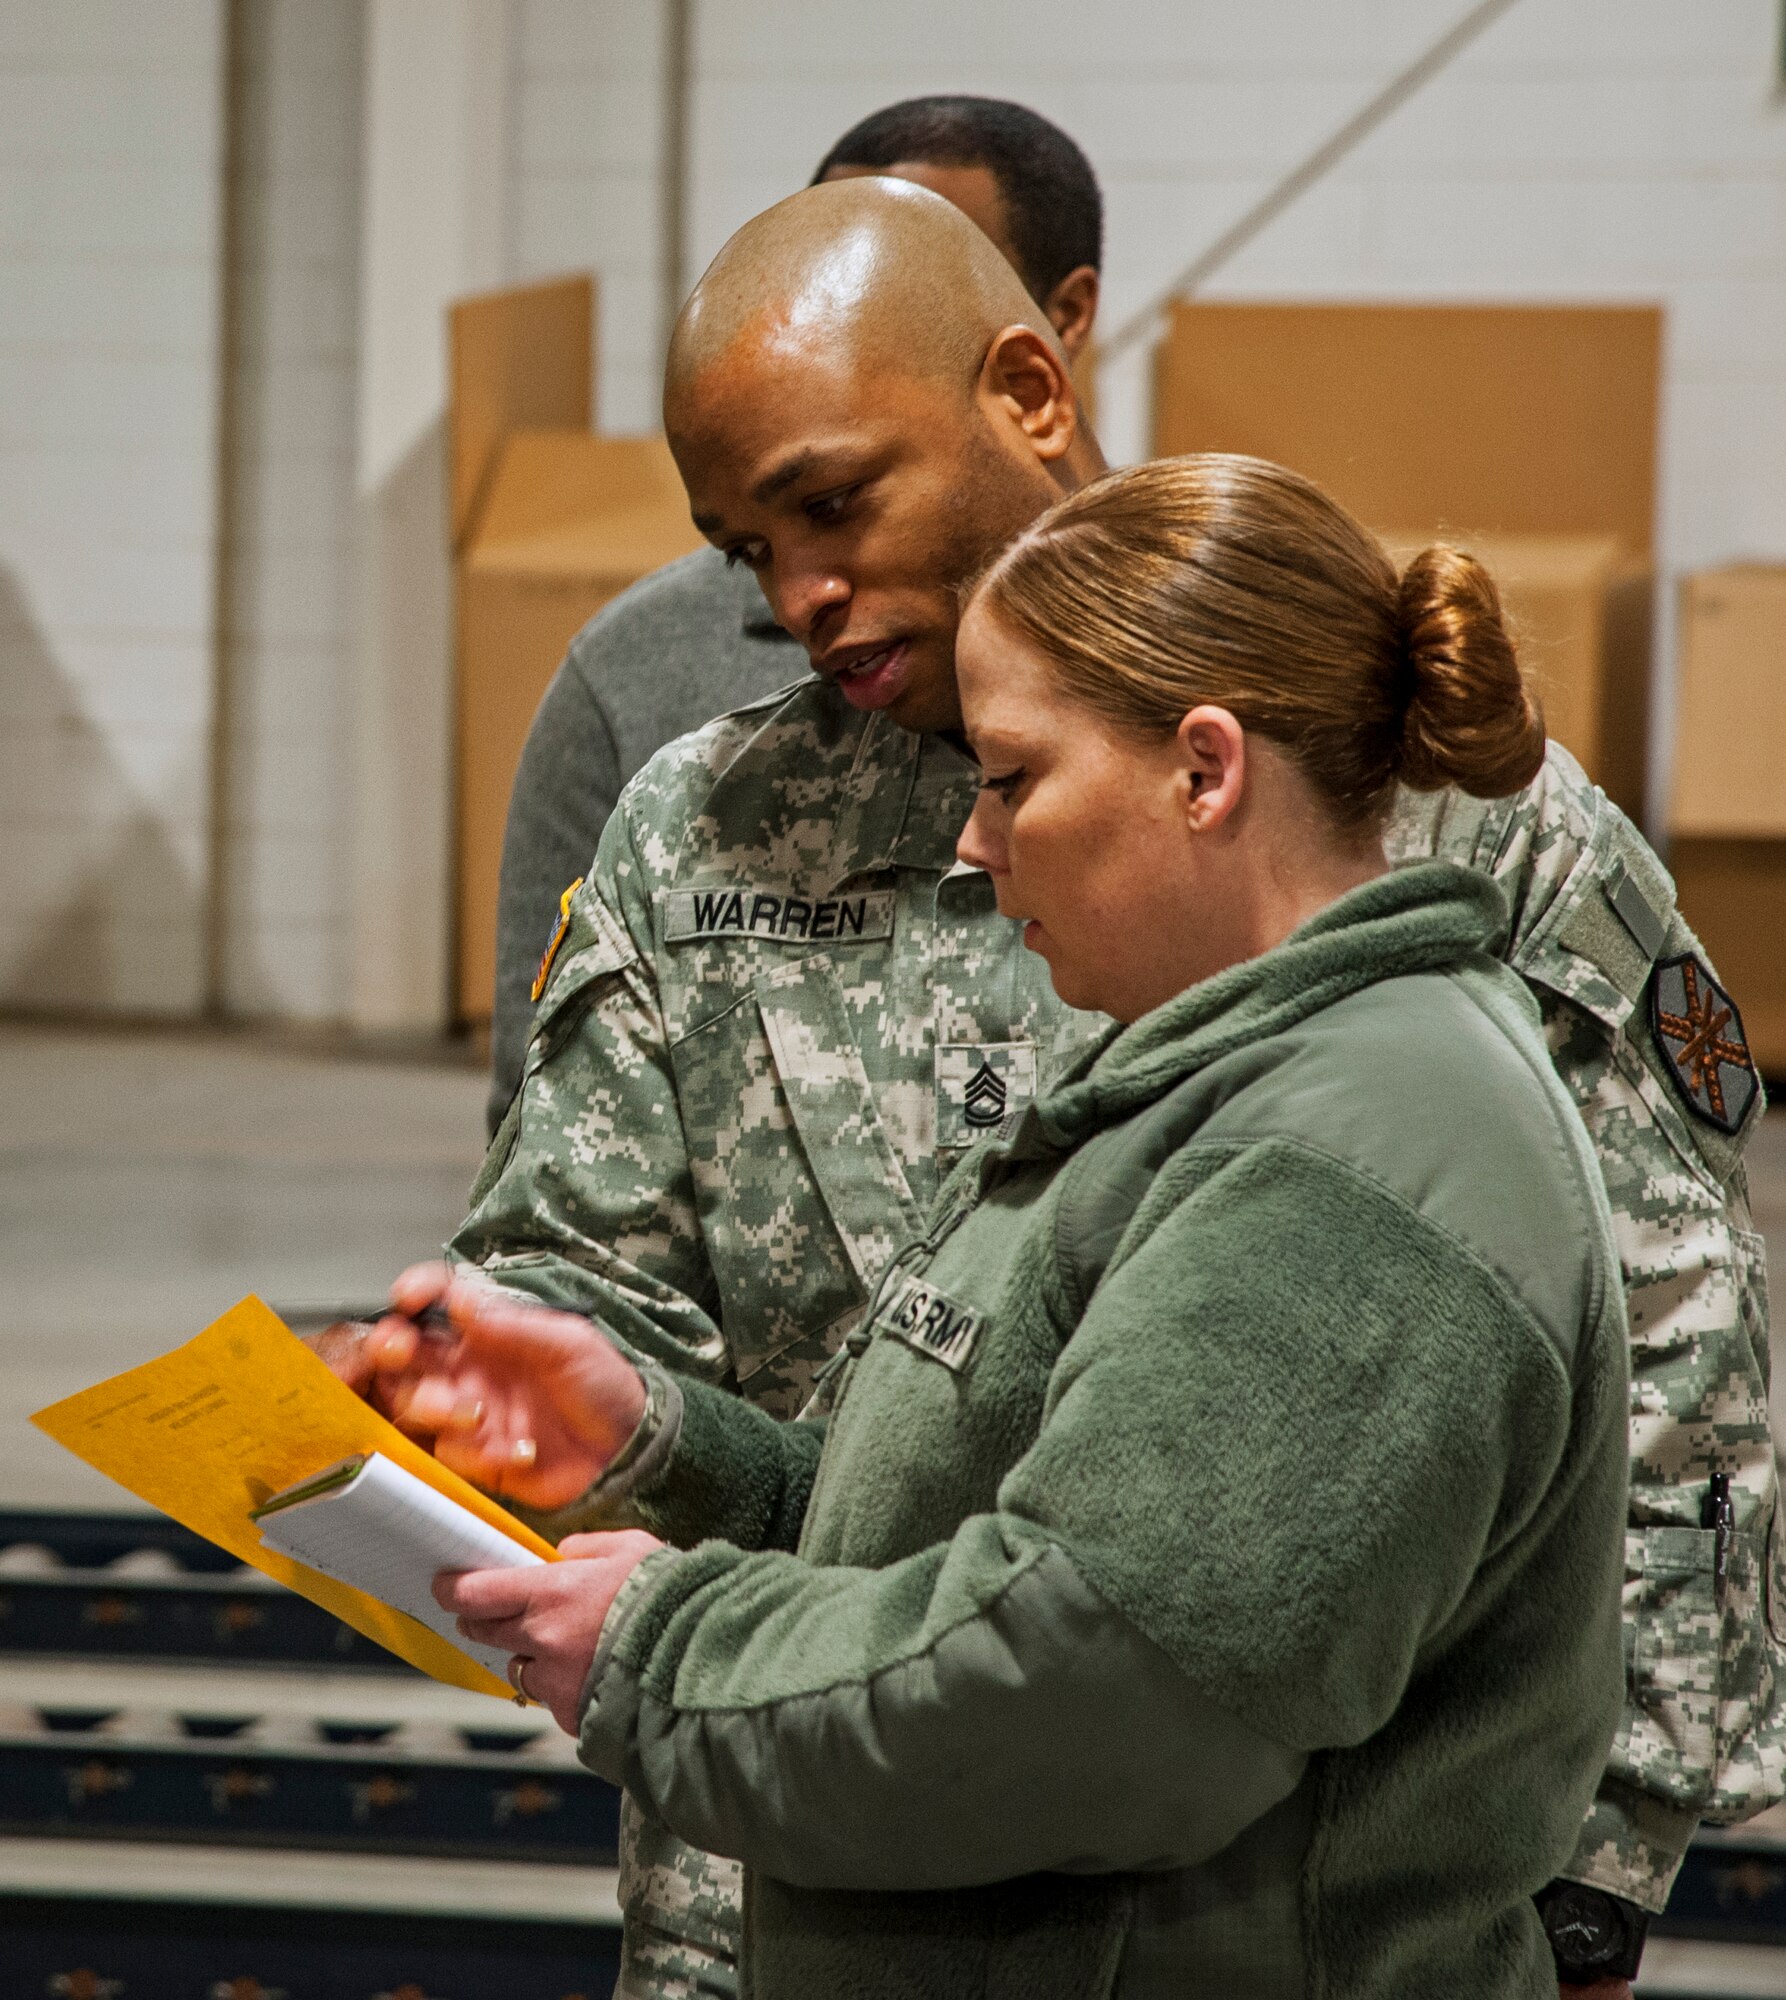 Army Sgt. First Class Leroy Warren, Arrival Departure Airfield Control Group NCO in charge, and Army Sgt. Amber Johnson, Federal Emergency Management Agency, discuss calculations of the weight of a truck during a joint exercise at Joint Base McGuire-Dix-Lakehurst, N.J., Feb. 12, 2015. Mobility specialists comprised of Army, Air Force and FEMA personnel came together to review policies and practices in the event airlift is needed to support a national emergency or crisis. (U.S. Air Force photo by Staff Sgt. Scott Saldukas/Released)